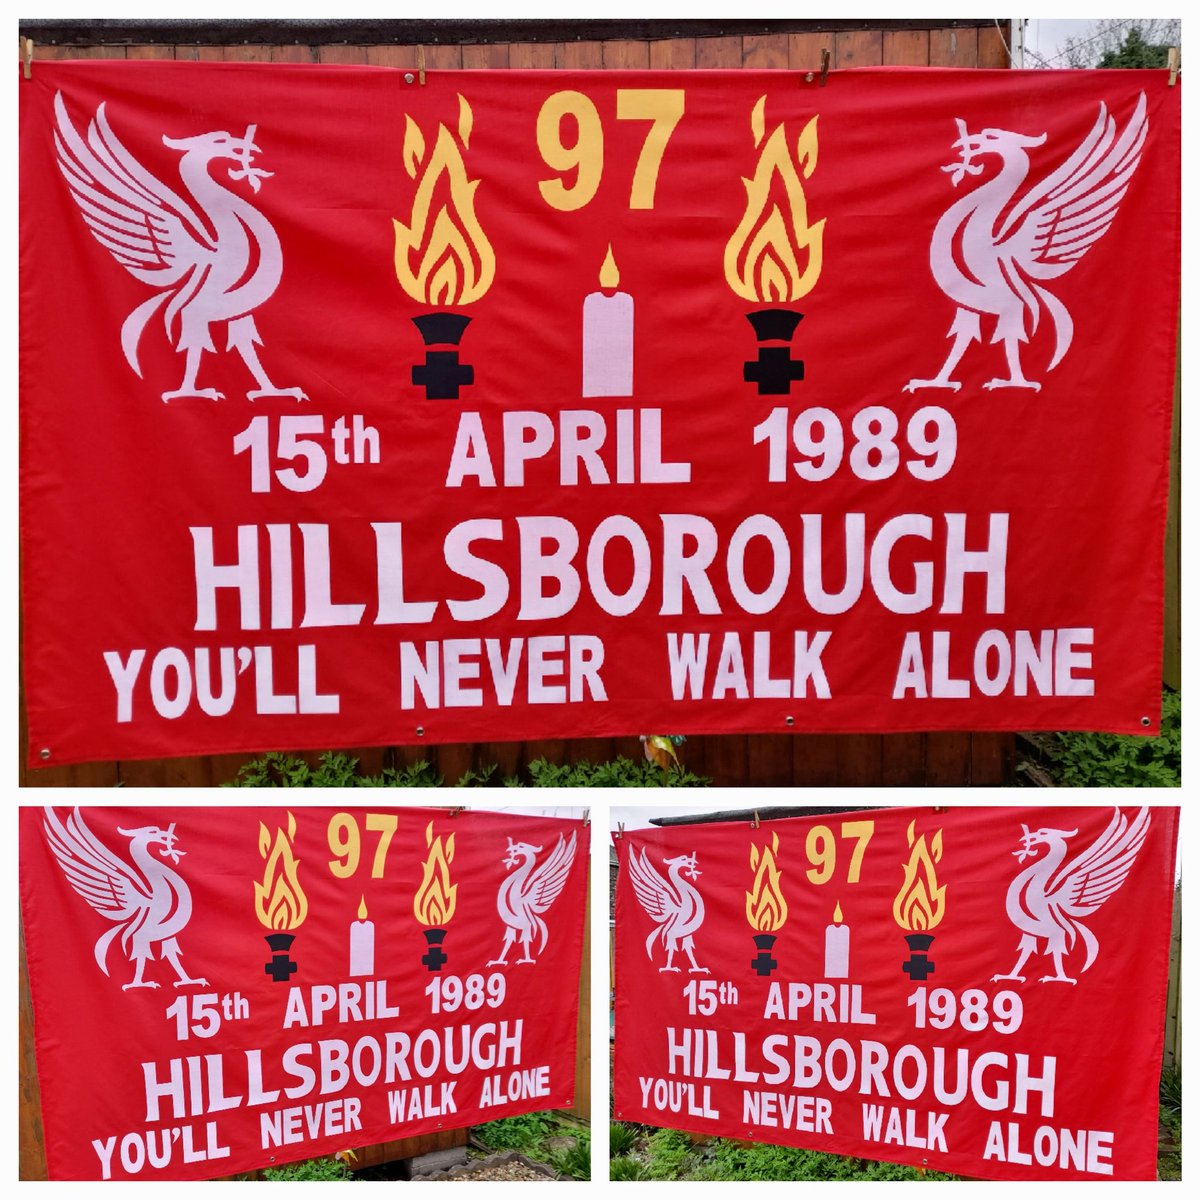 Remembering The 97. 'You'll Never Walk Alone' ♥️